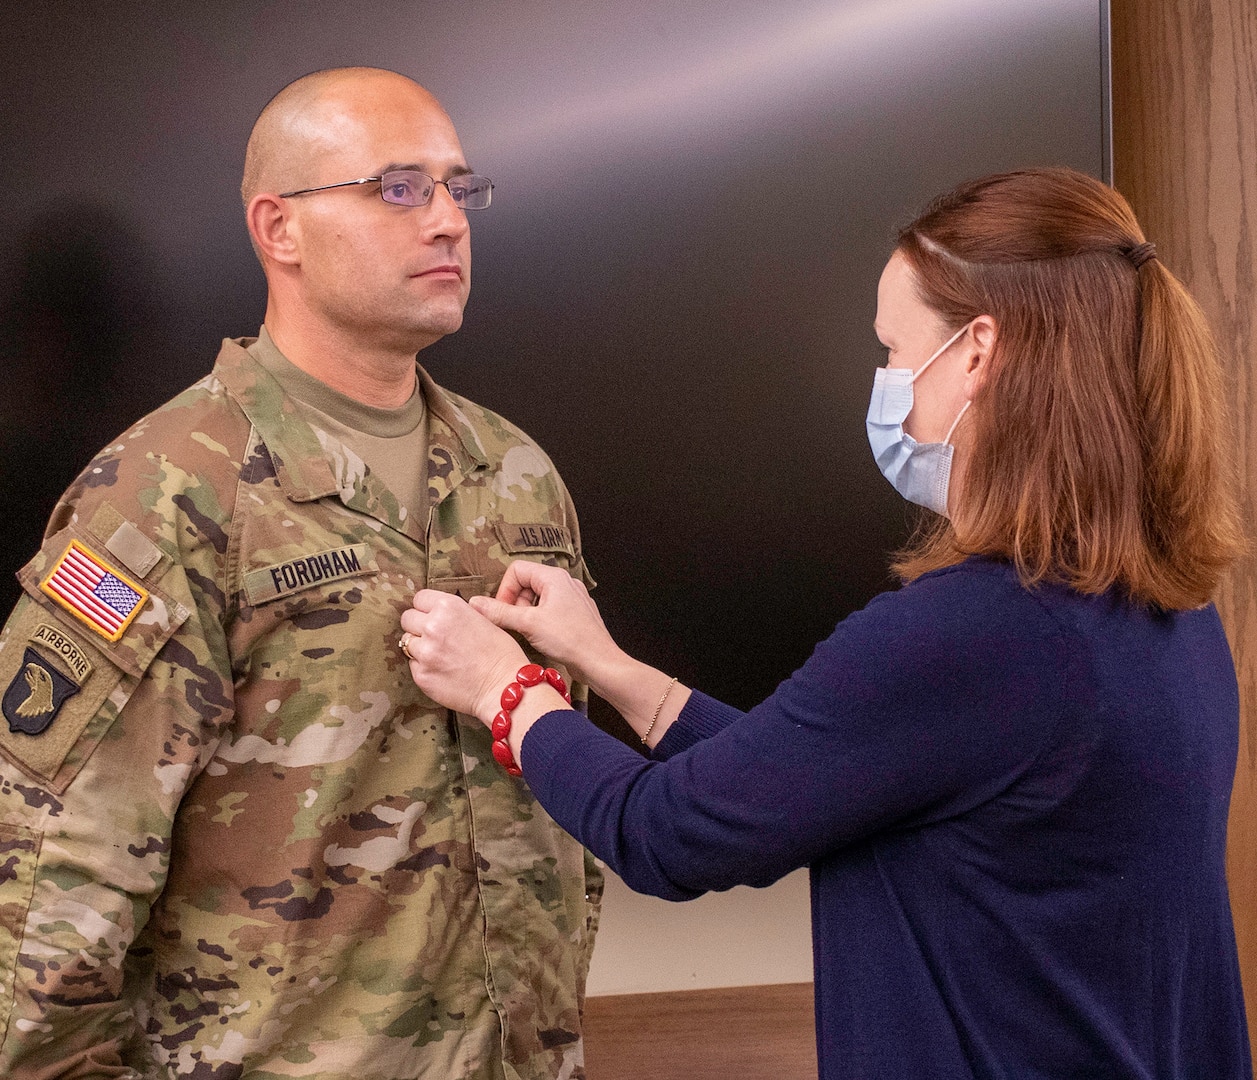 Stephanie Fordham, the wife of newly promoted Illinois Army National Guard Sgt. Maj. Nicholaus Fordham, of Sherman, Illinois, secures his new rank on his uniform during the promotion ceremony, Sept. 16 at Joint Force Headquarters, Camp Lincoln, Springfield, Illinois.